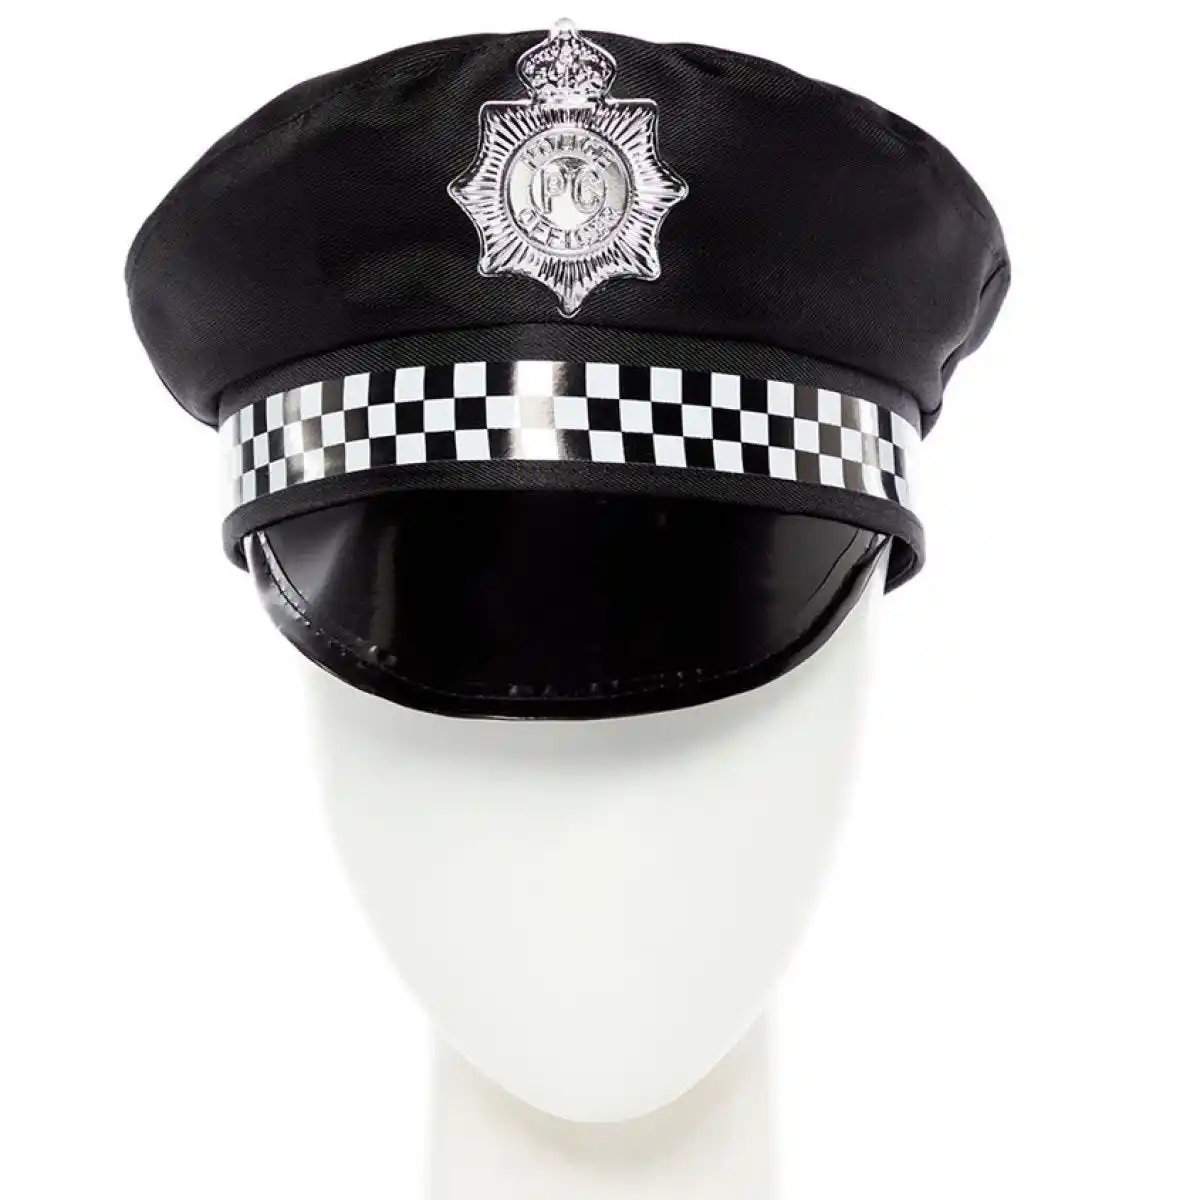 Halloween black and blue cosplay police flat top hat fancy dress funny party hat